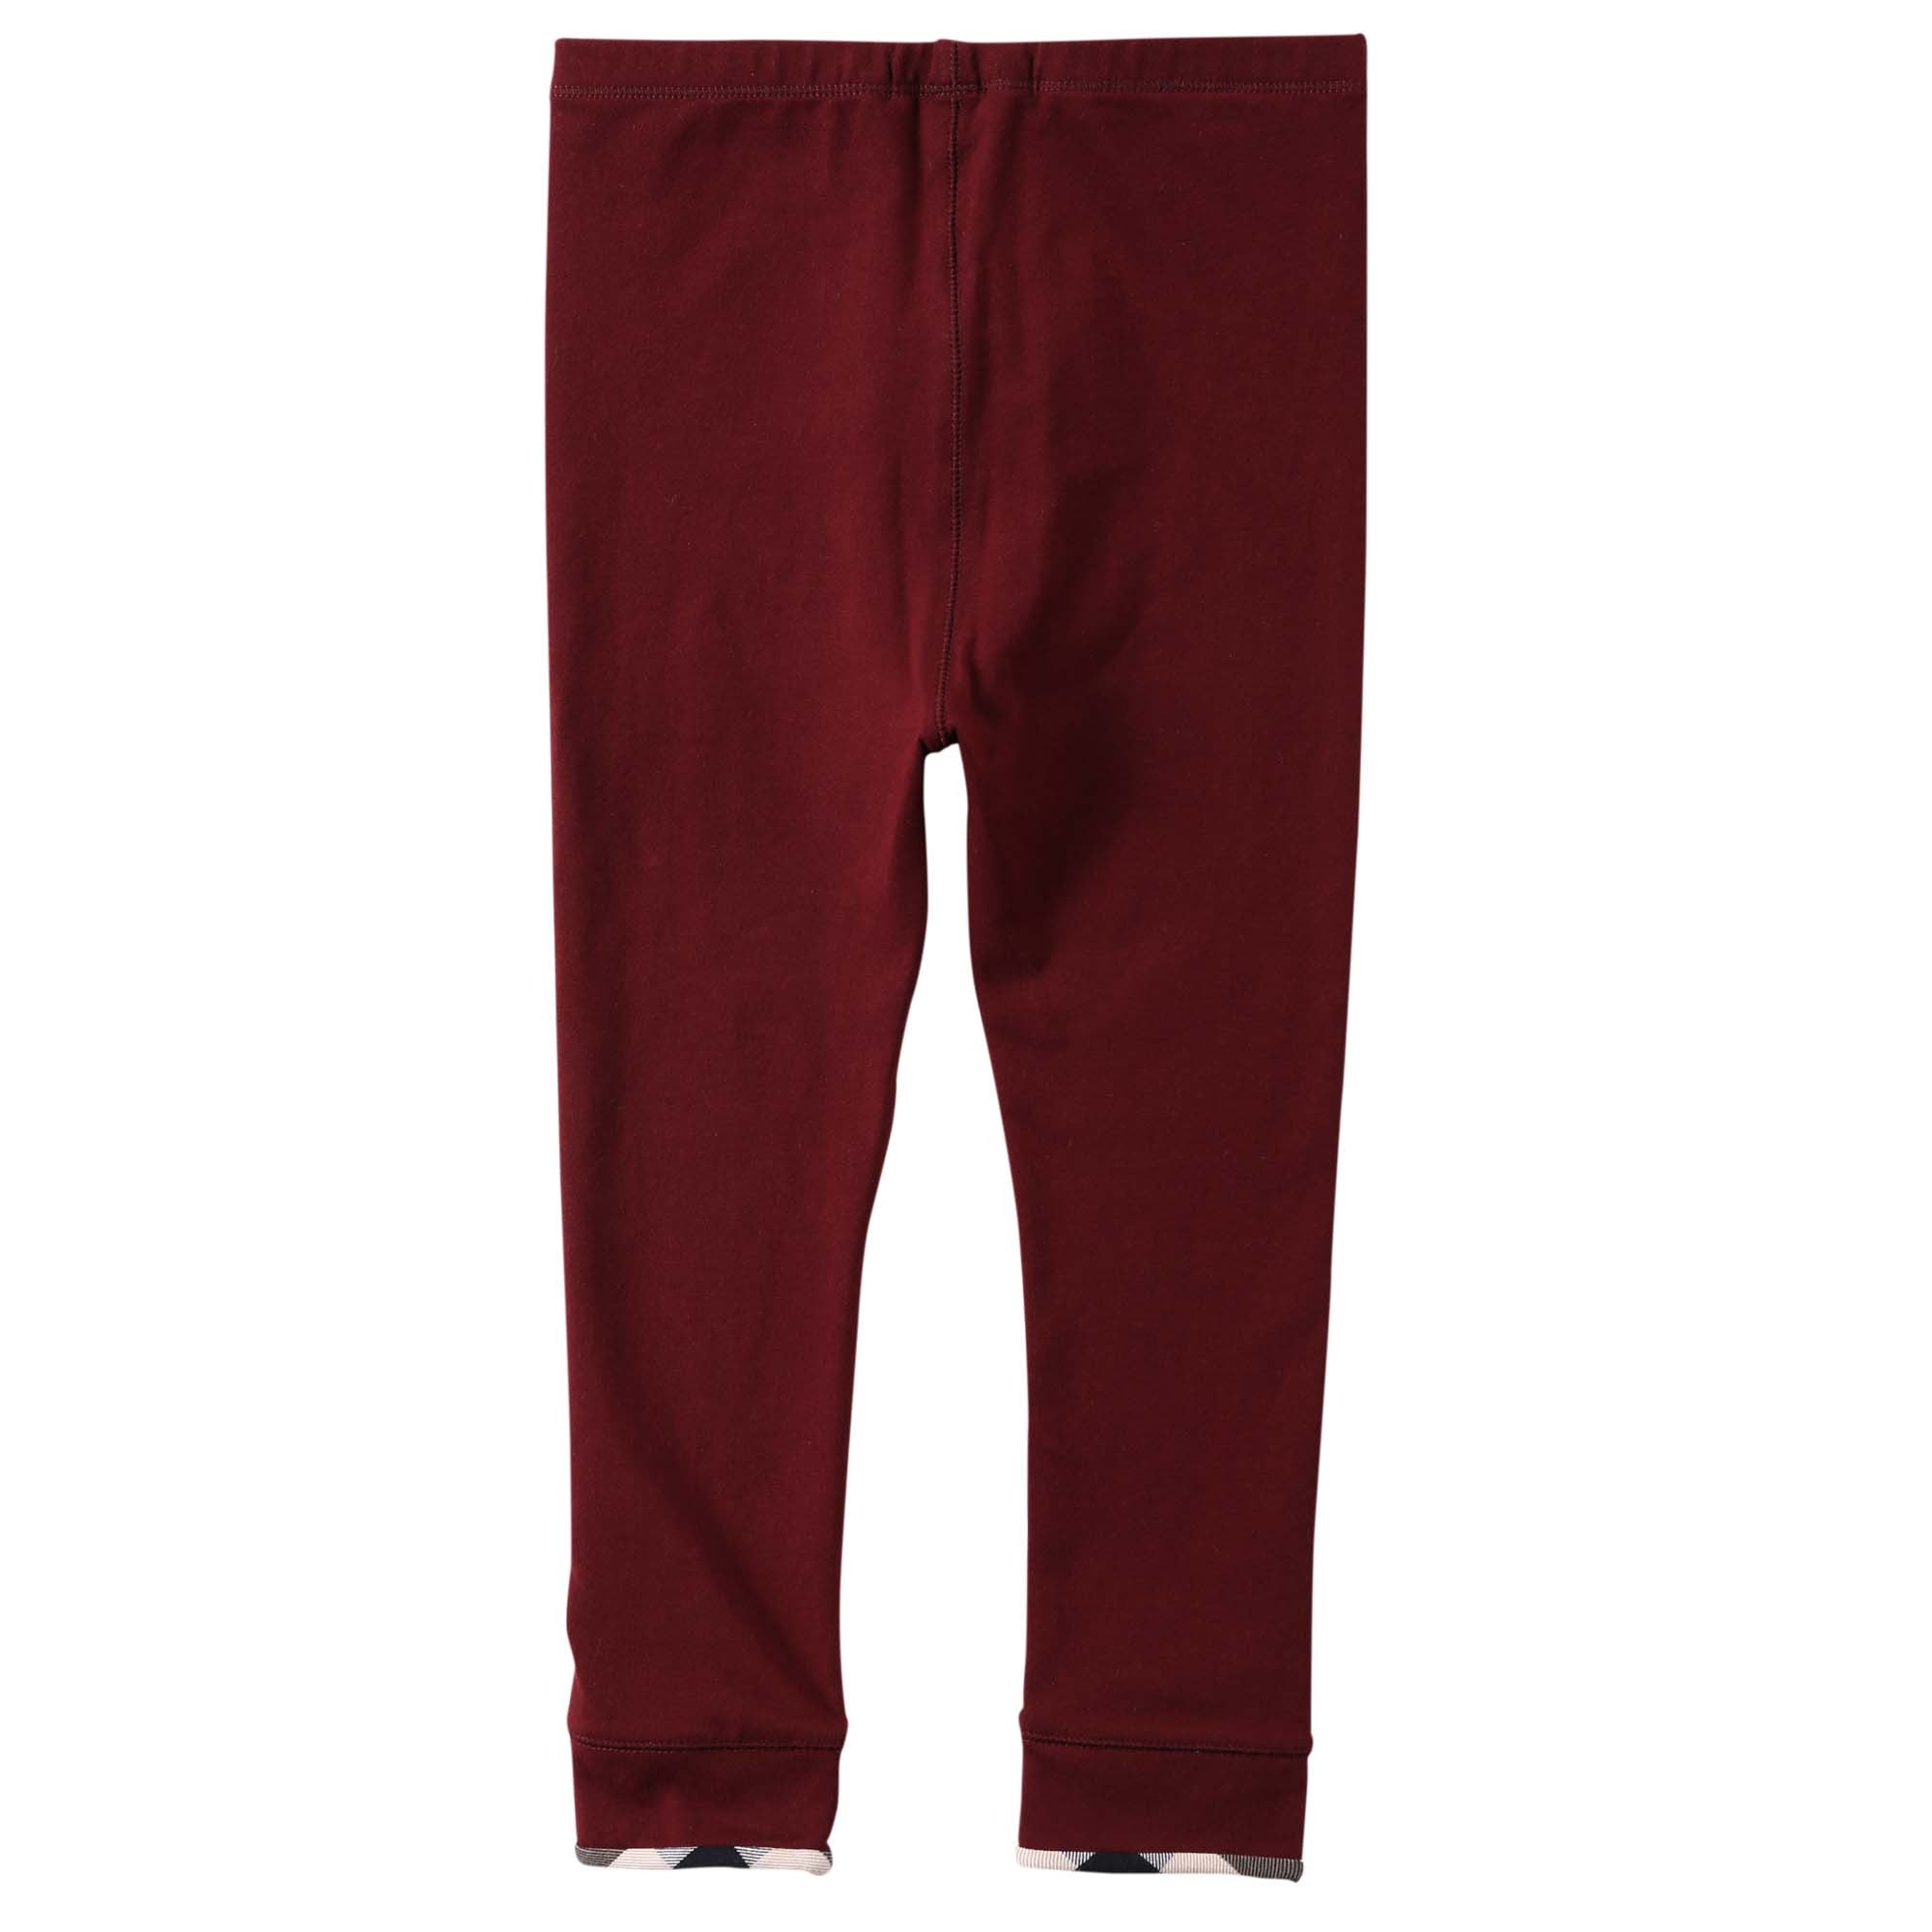 Baby Boys&Girls Deep Red Cotton Twill Chino Trousers - CÉMAROSE | Children's Fashion Store - 2